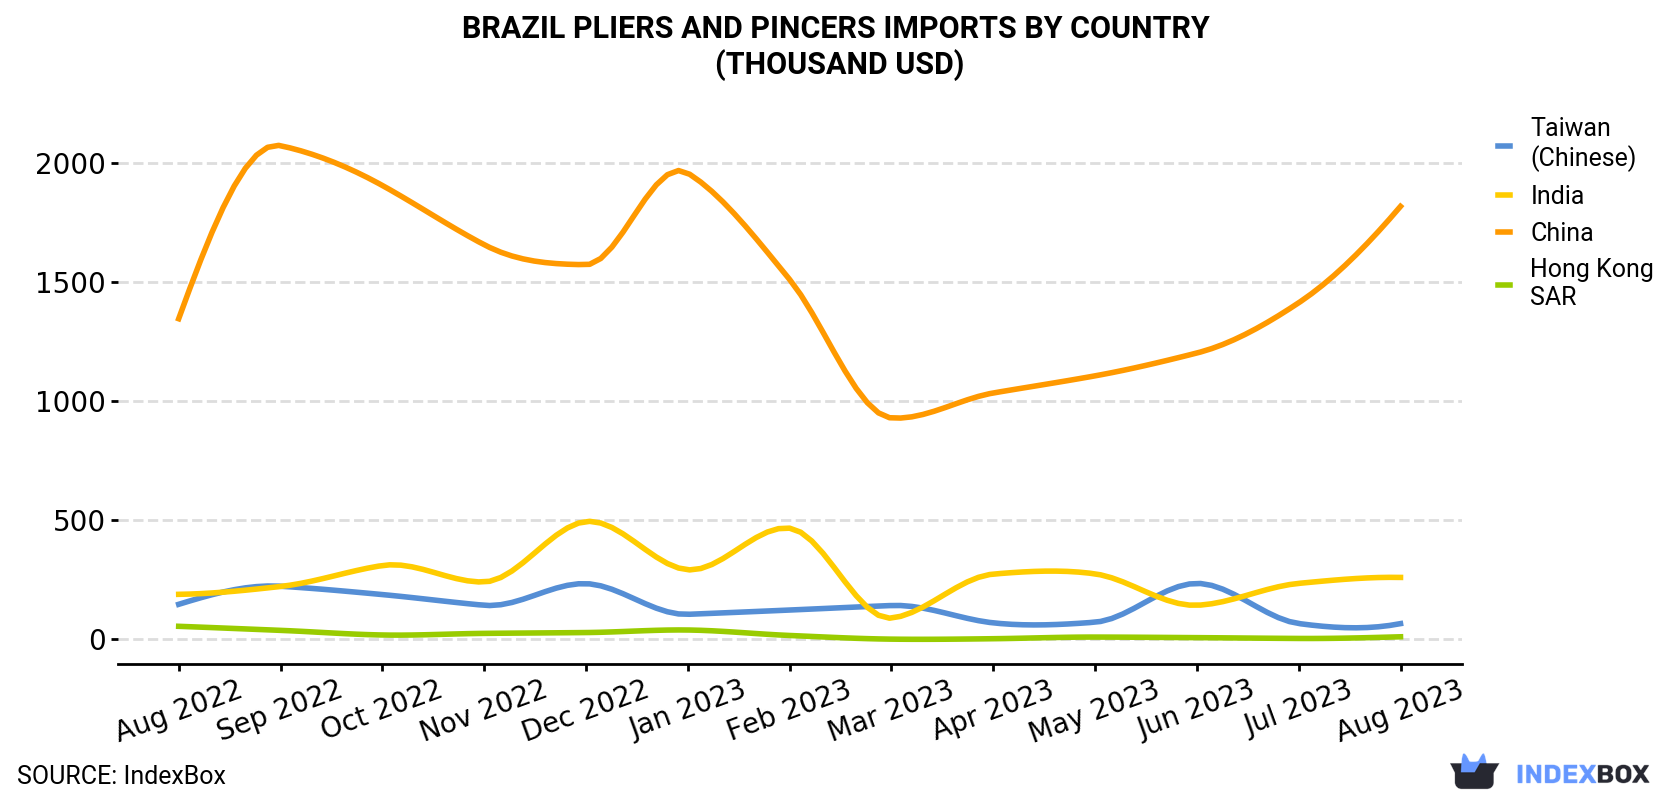 Brazil Pliers And Pincers Imports By Country (Thousand USD)